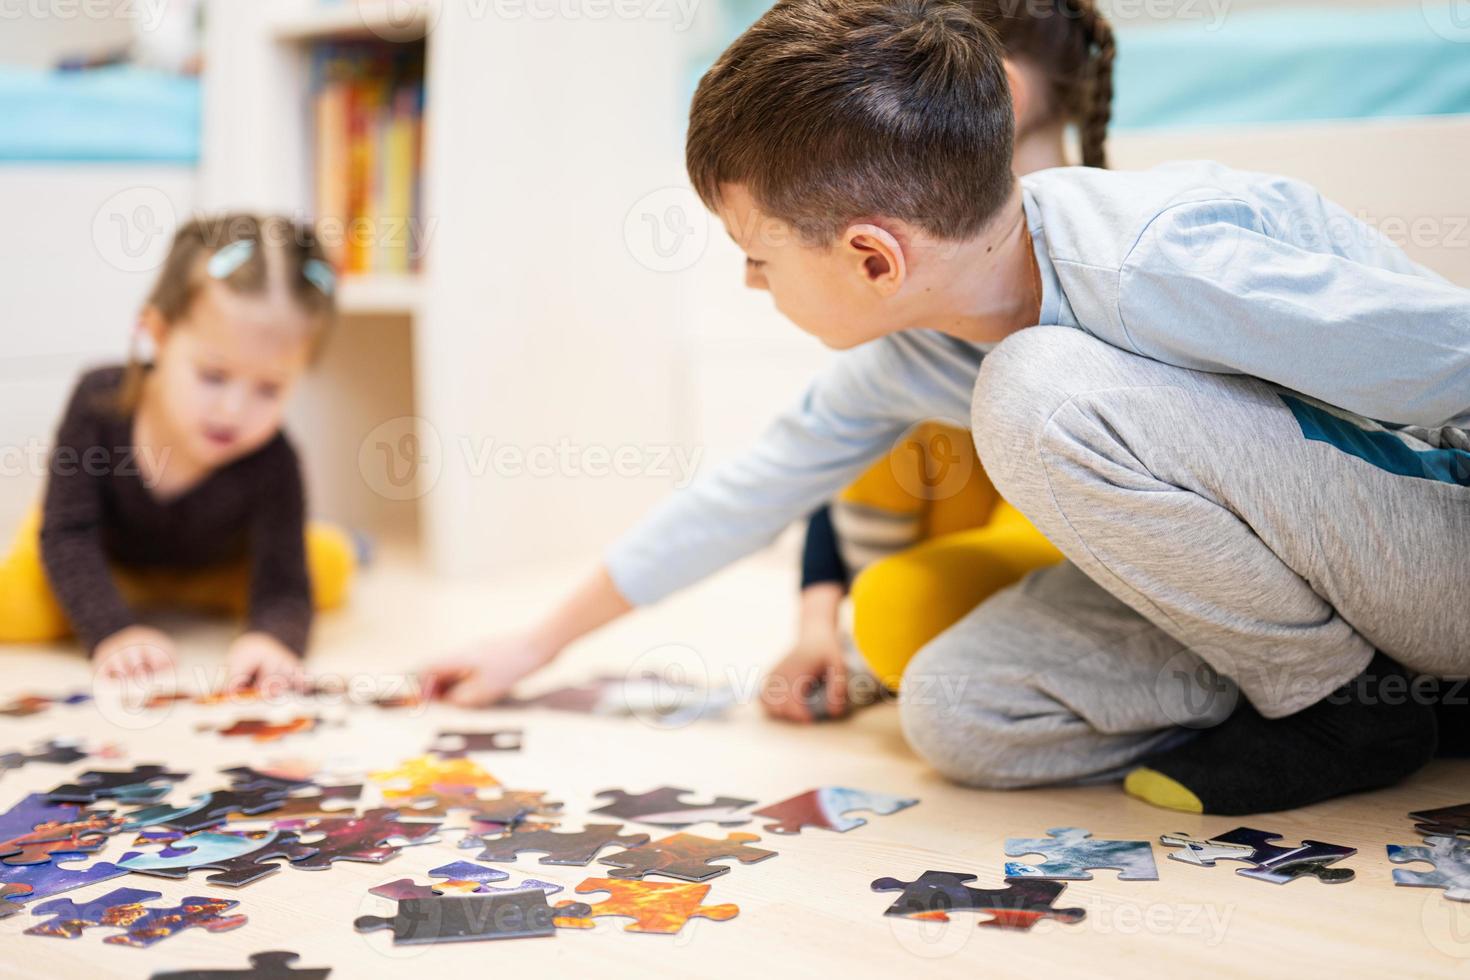 Children connecting jigsaw puzzle pieces in a kids room on floor at home.  Fun family activity leisure. photo